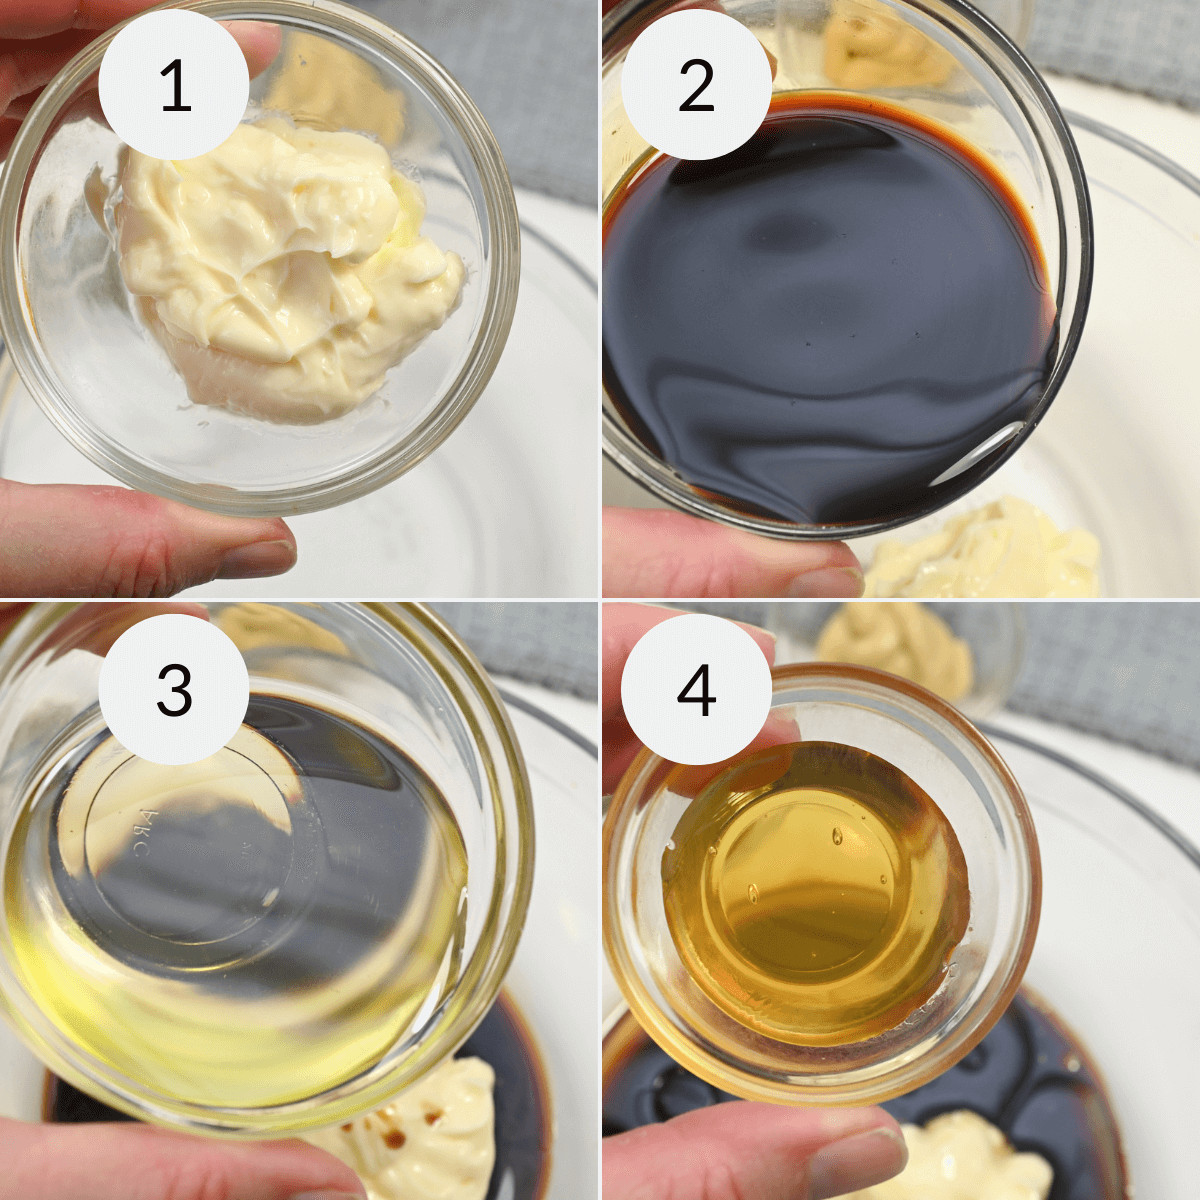 Four-step process of making a dressing: 1. mayonnaise in a bowl, 2. adding balsamic liquid, 3. pouring clear oil, 4. final mixed sauce